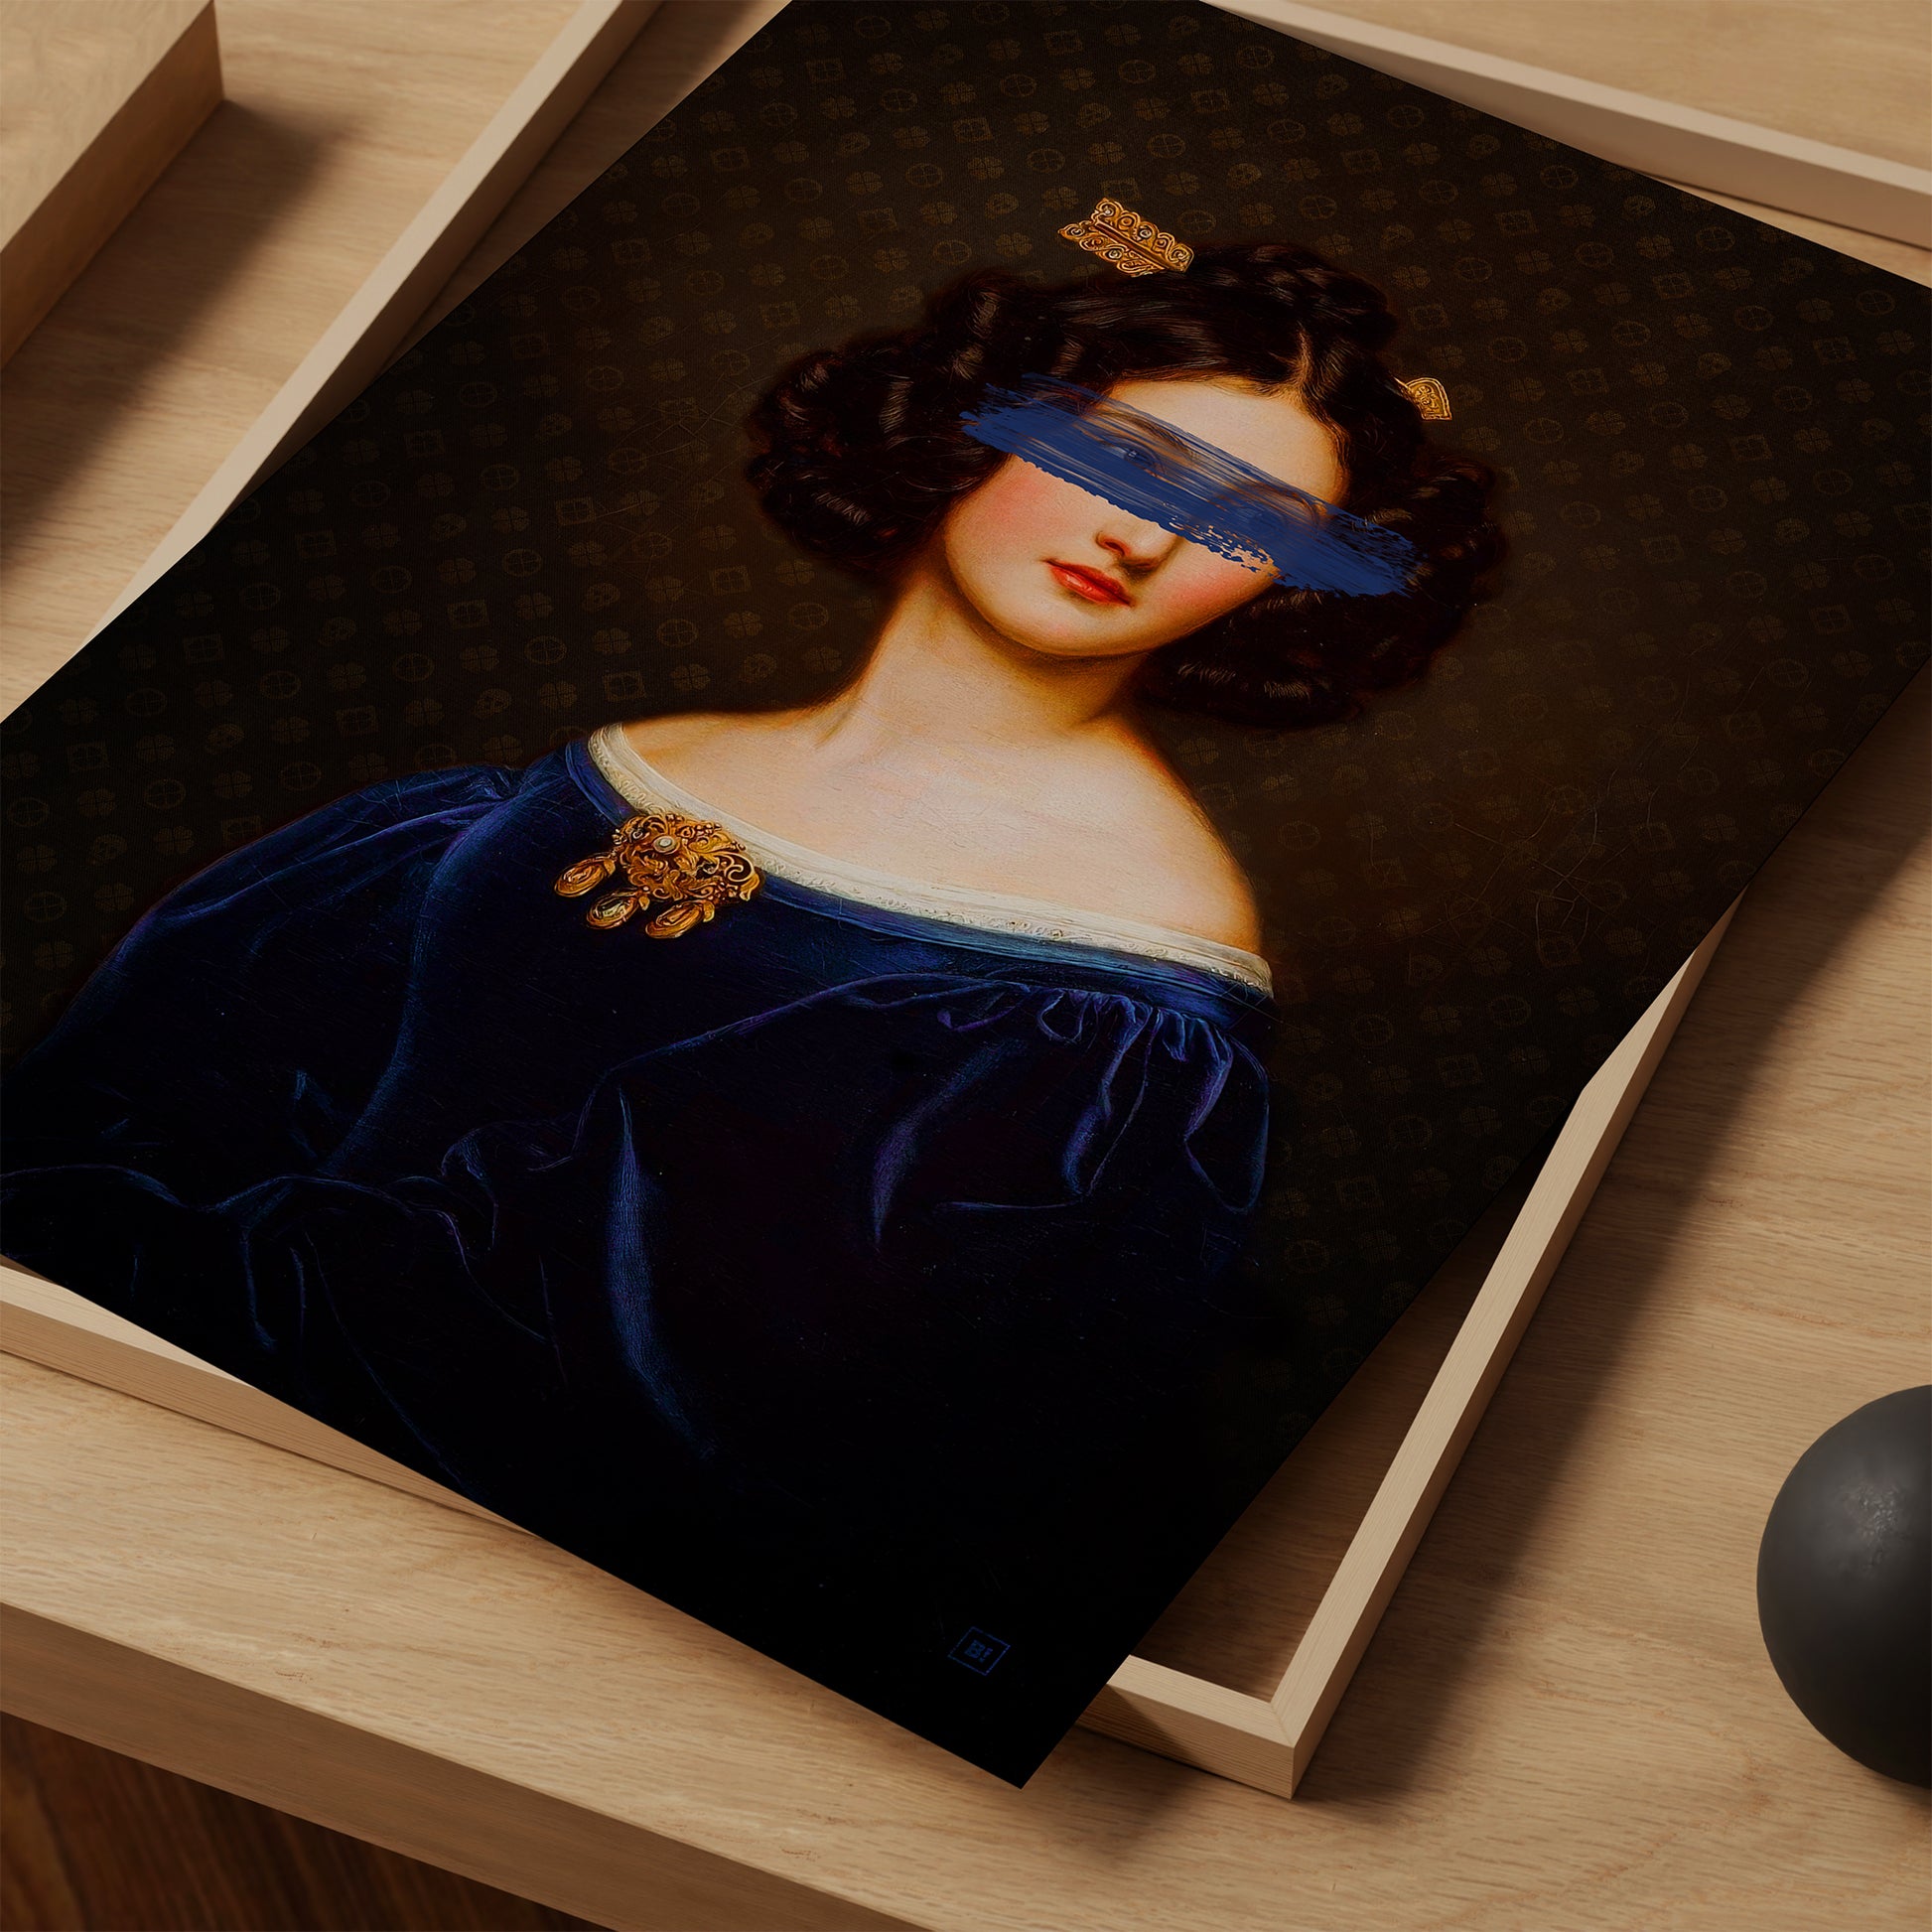 Be inspired by our "Dark and Moody Portrait of Nanette" art print! This artwork has been printed using the giclée process on archival acid-free paper. It is showcased as a close-up print, highlighting its timeless beauty in every detail.